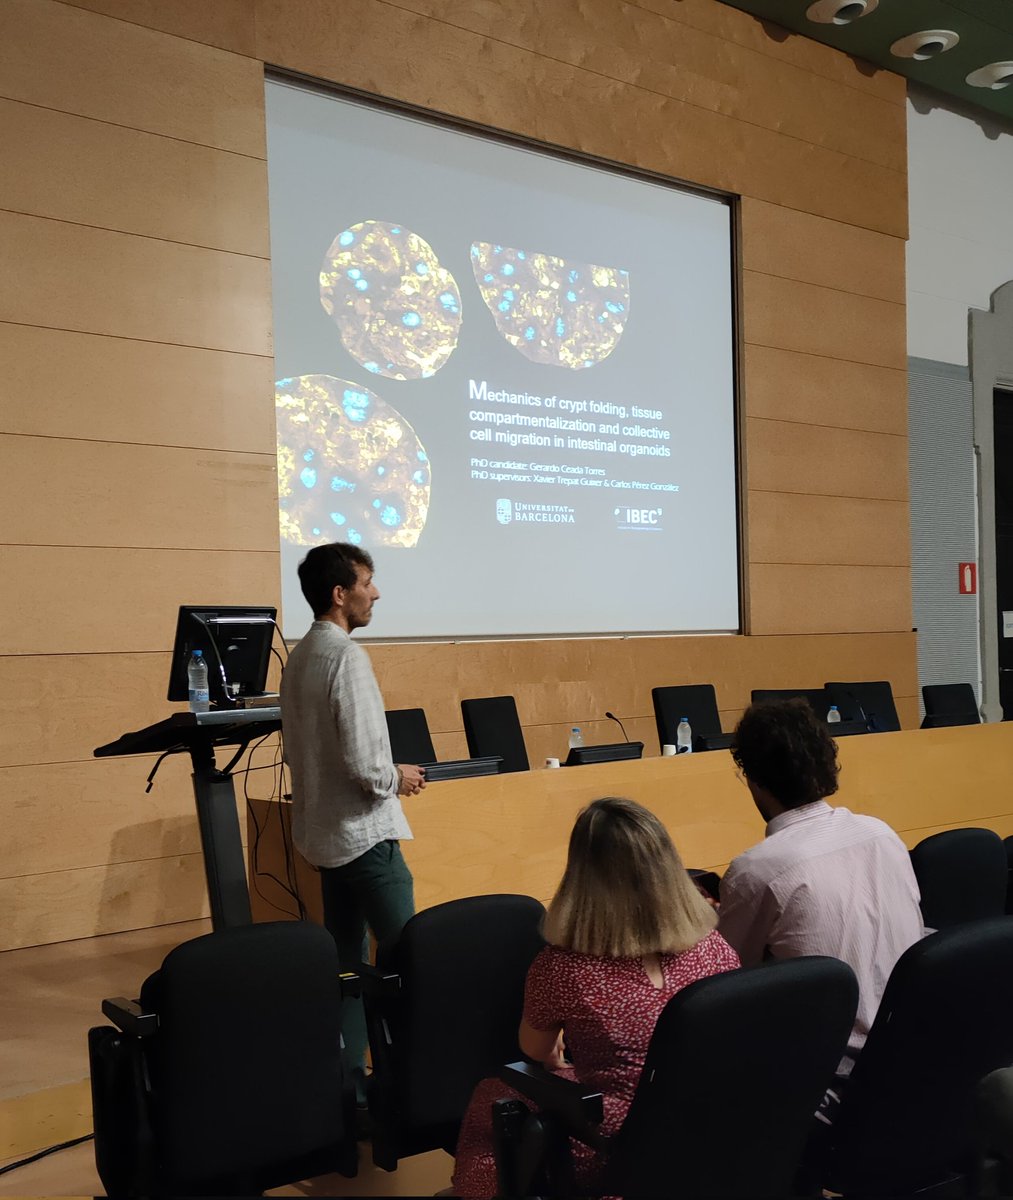 I am so happy to share that last Friday I defended my PhD thesis! @DoctoratUB @BecariosFLC Enormous thanks to my supervisors @XavierTrepat @PerezGonzalezCa for their dedication to me during these years. I learnt a lot from you!